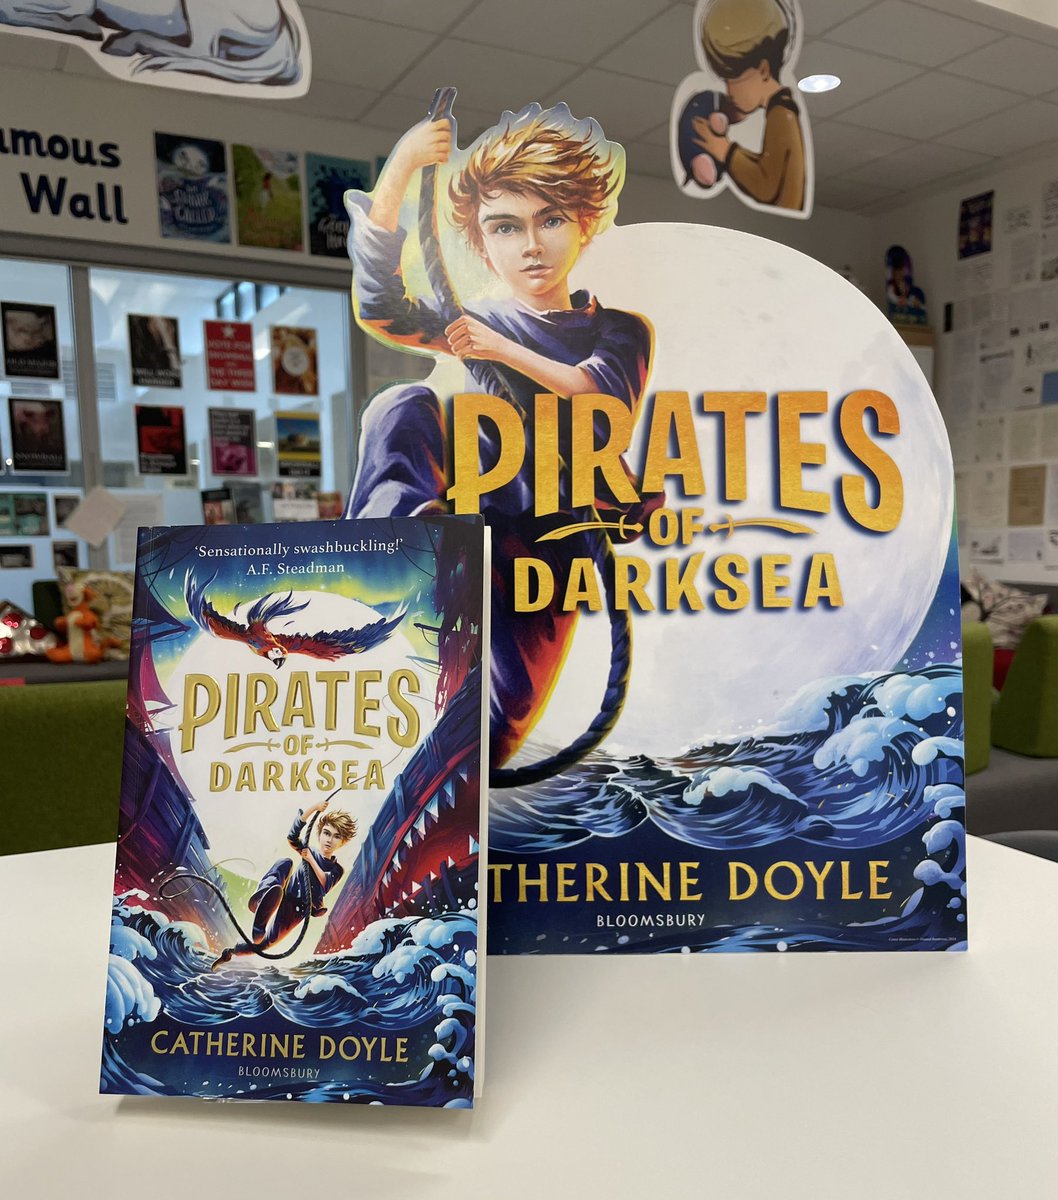 Absolutely thrilled to be reading #PieatesOfDarksea @doyle_cat @KidsBloomsbury with my classes today. They are going to love this brilliantly written, swashbuckling adventure 😊📚🎉